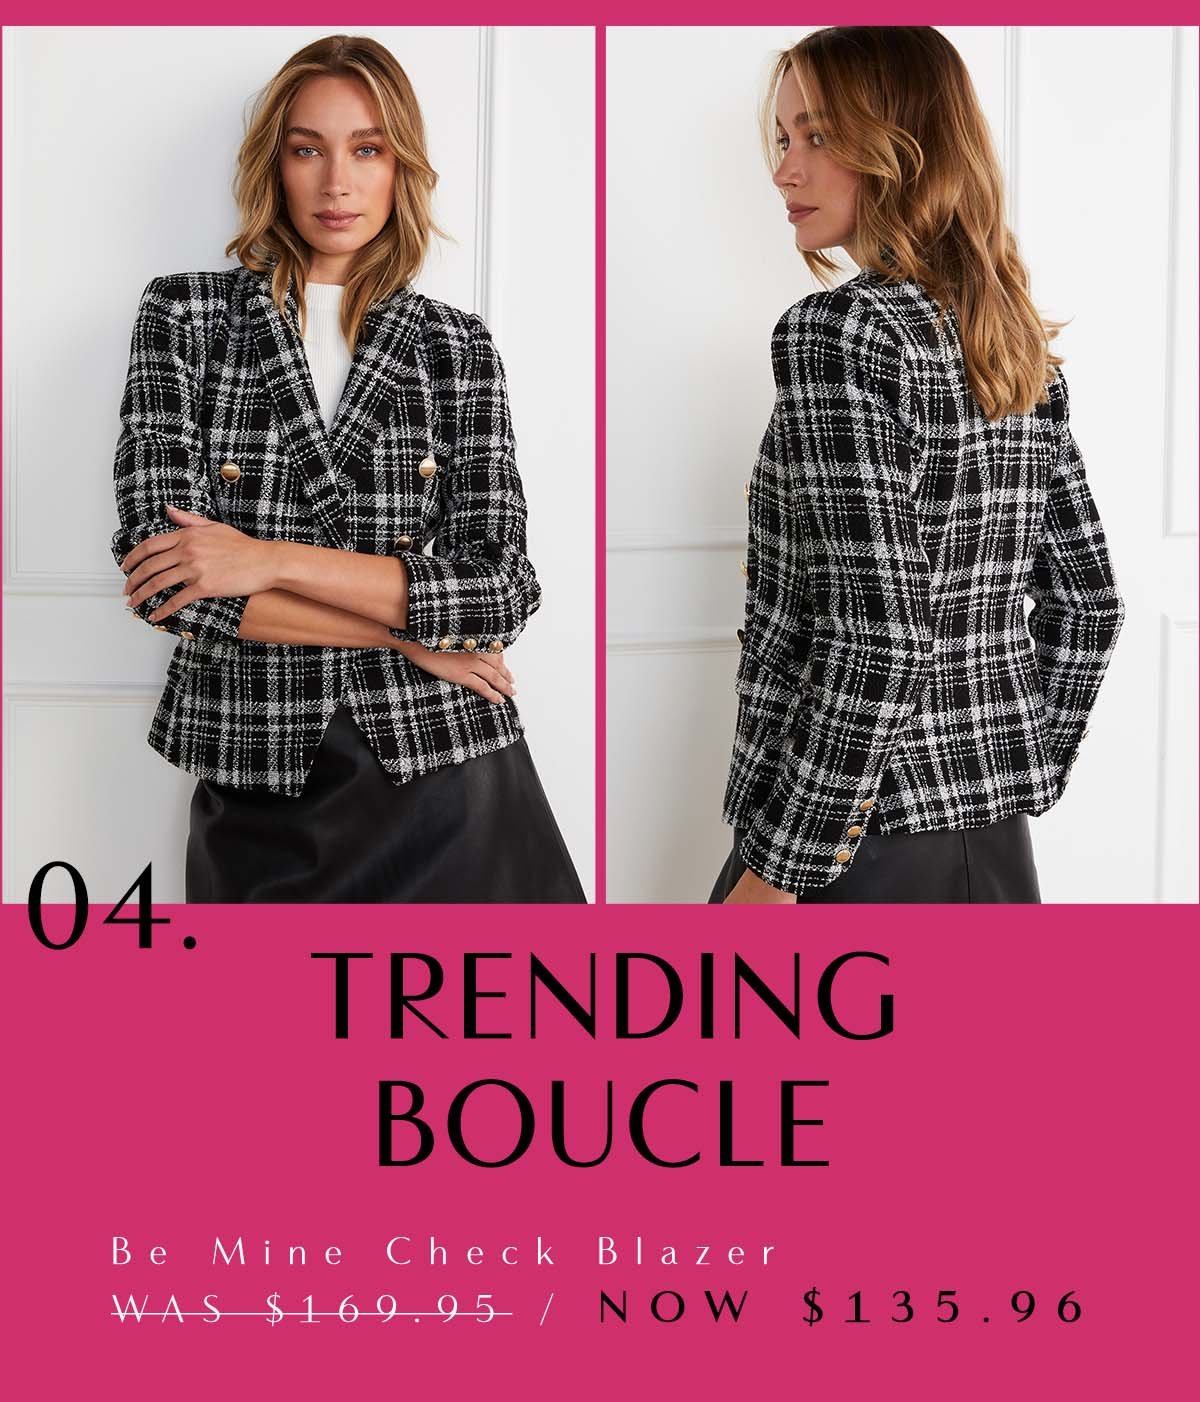 04. Trending Boucle. Be Mine Check Blazer WAS $169.95 / NOW $135.96